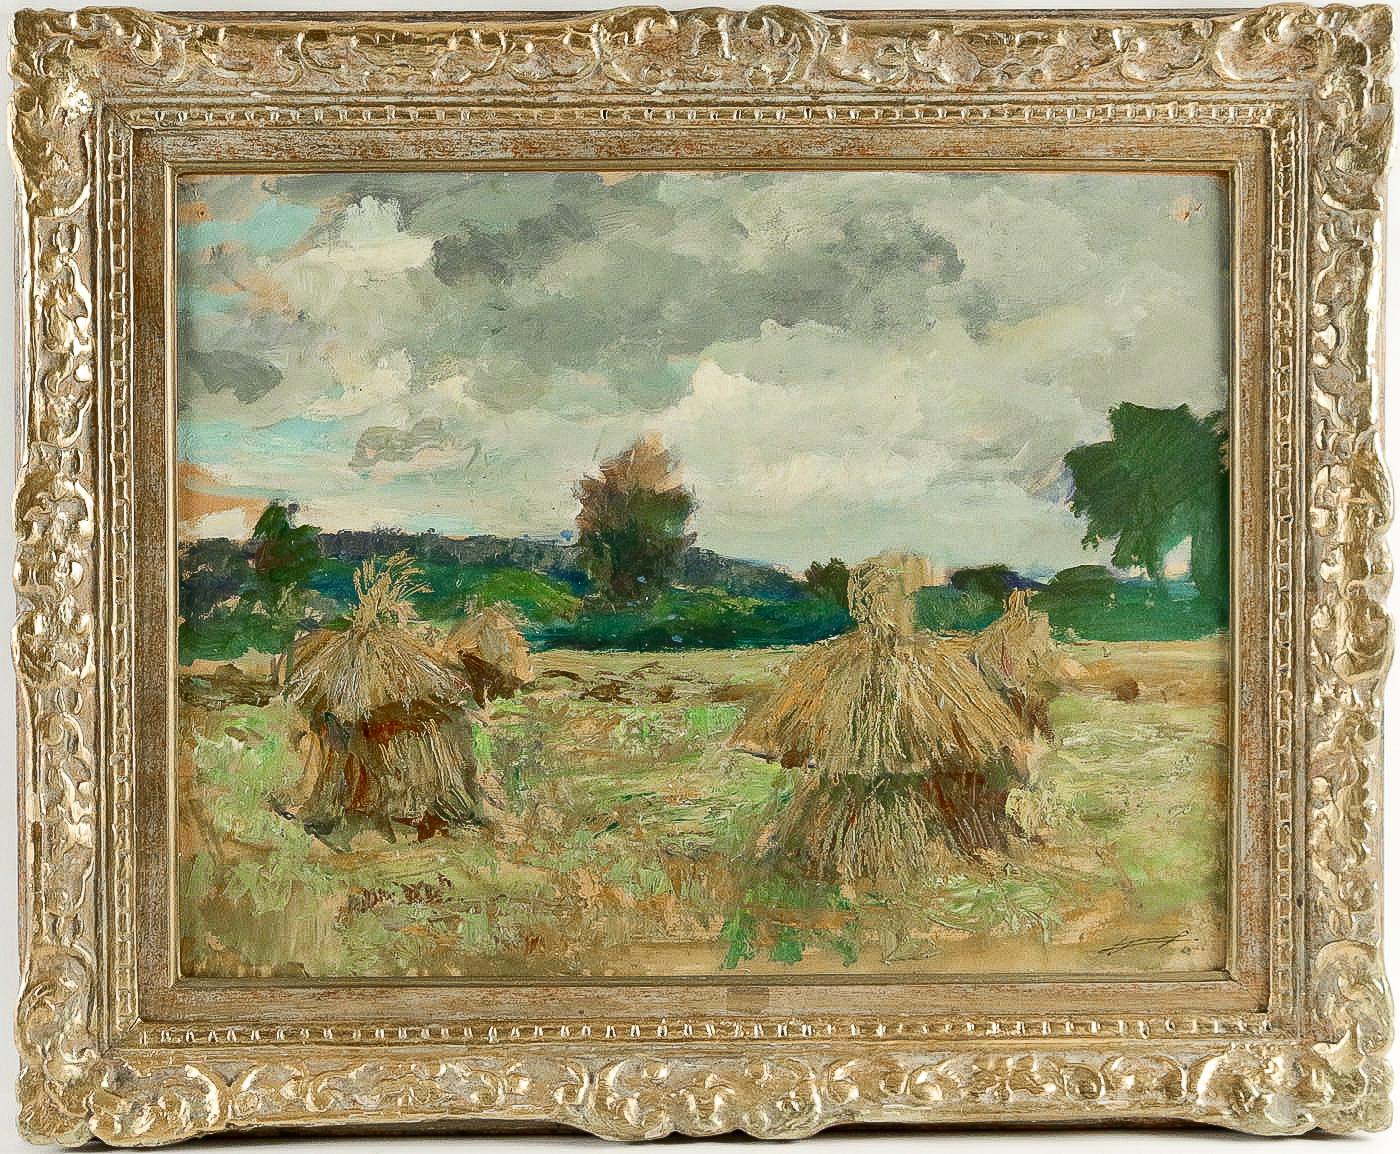 An exciting and decorative oil on panel depicting a Haystacks under the Thunderstorm. Our painting signed and dated 1946 on the lower right.

Fine original condition.

Dimensions unframed: W 25.19 In. - H 18.89 In.
Dimensions framed: W 31.49 In. - H